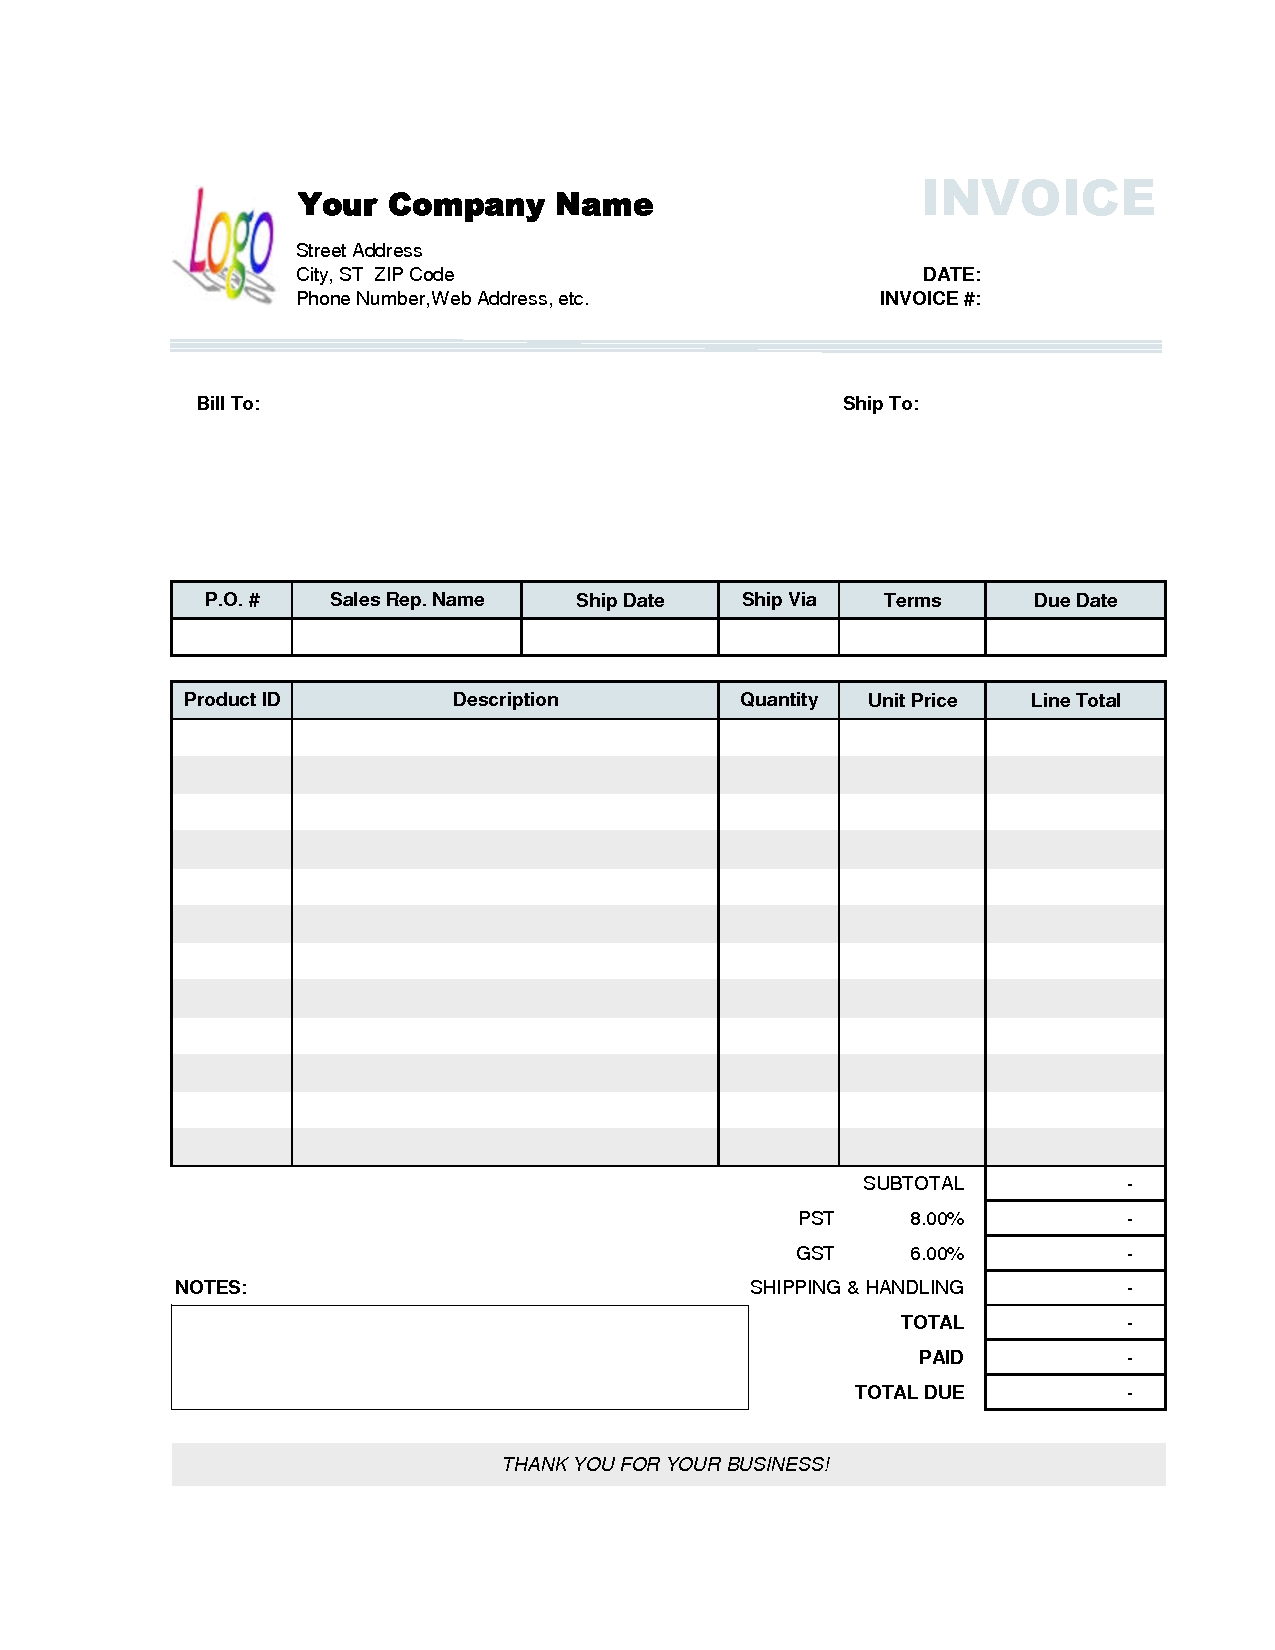 invoice template excel 2010 14 best photos of excel 2010 invoice template free simple 1275 X 1650